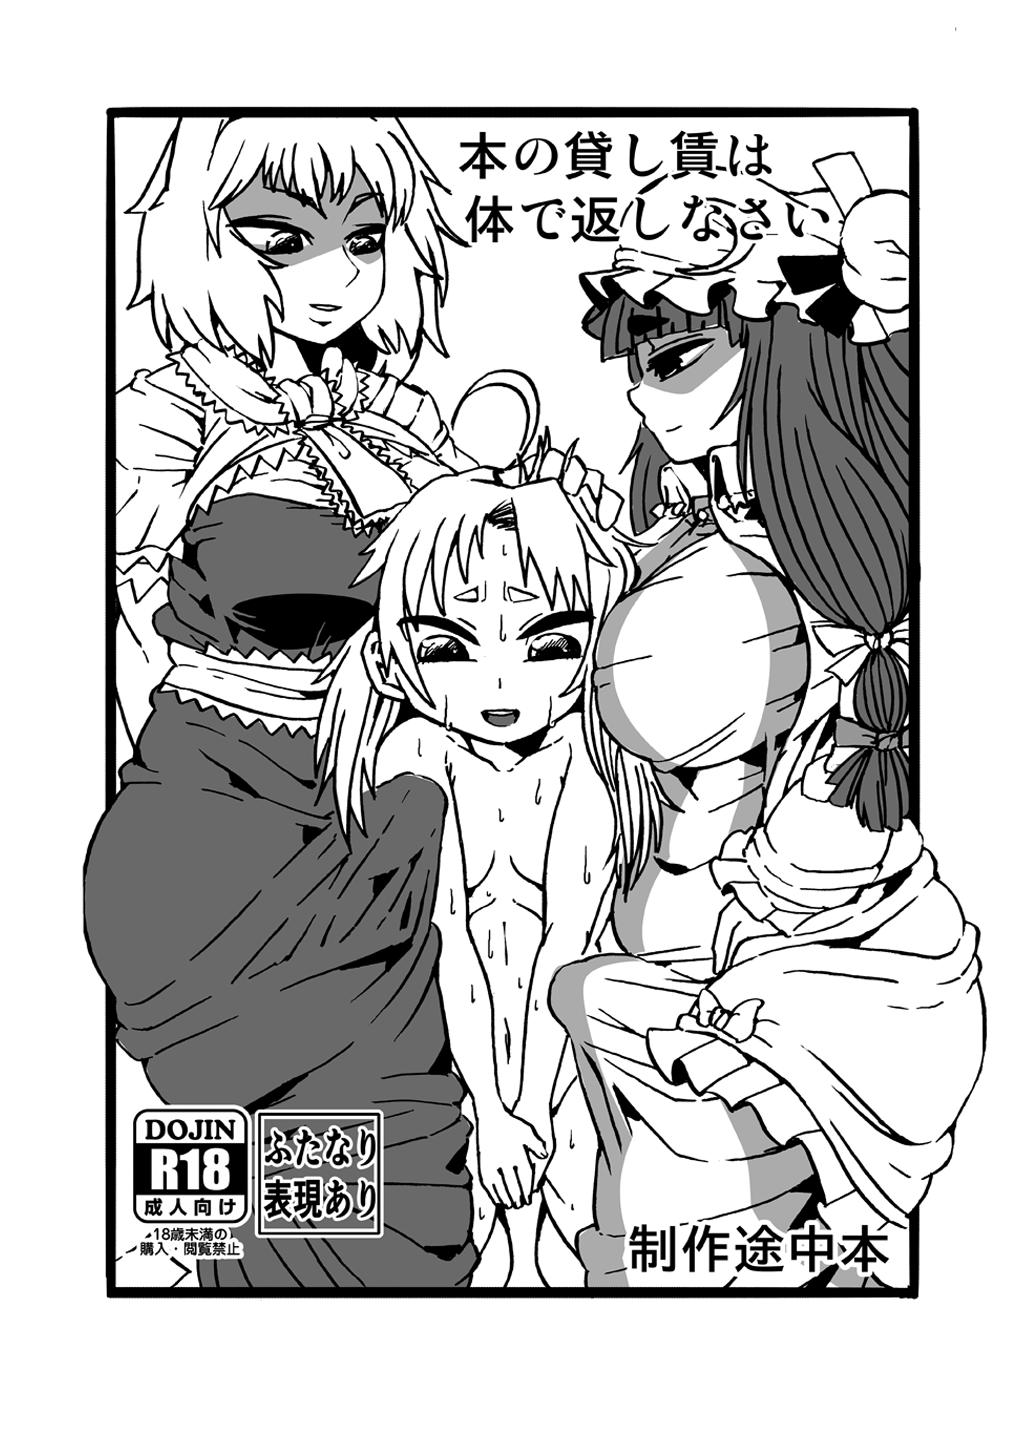 Old Vs Young C94お疲れさまでした - Touhou project Fuck For Money - Page 1